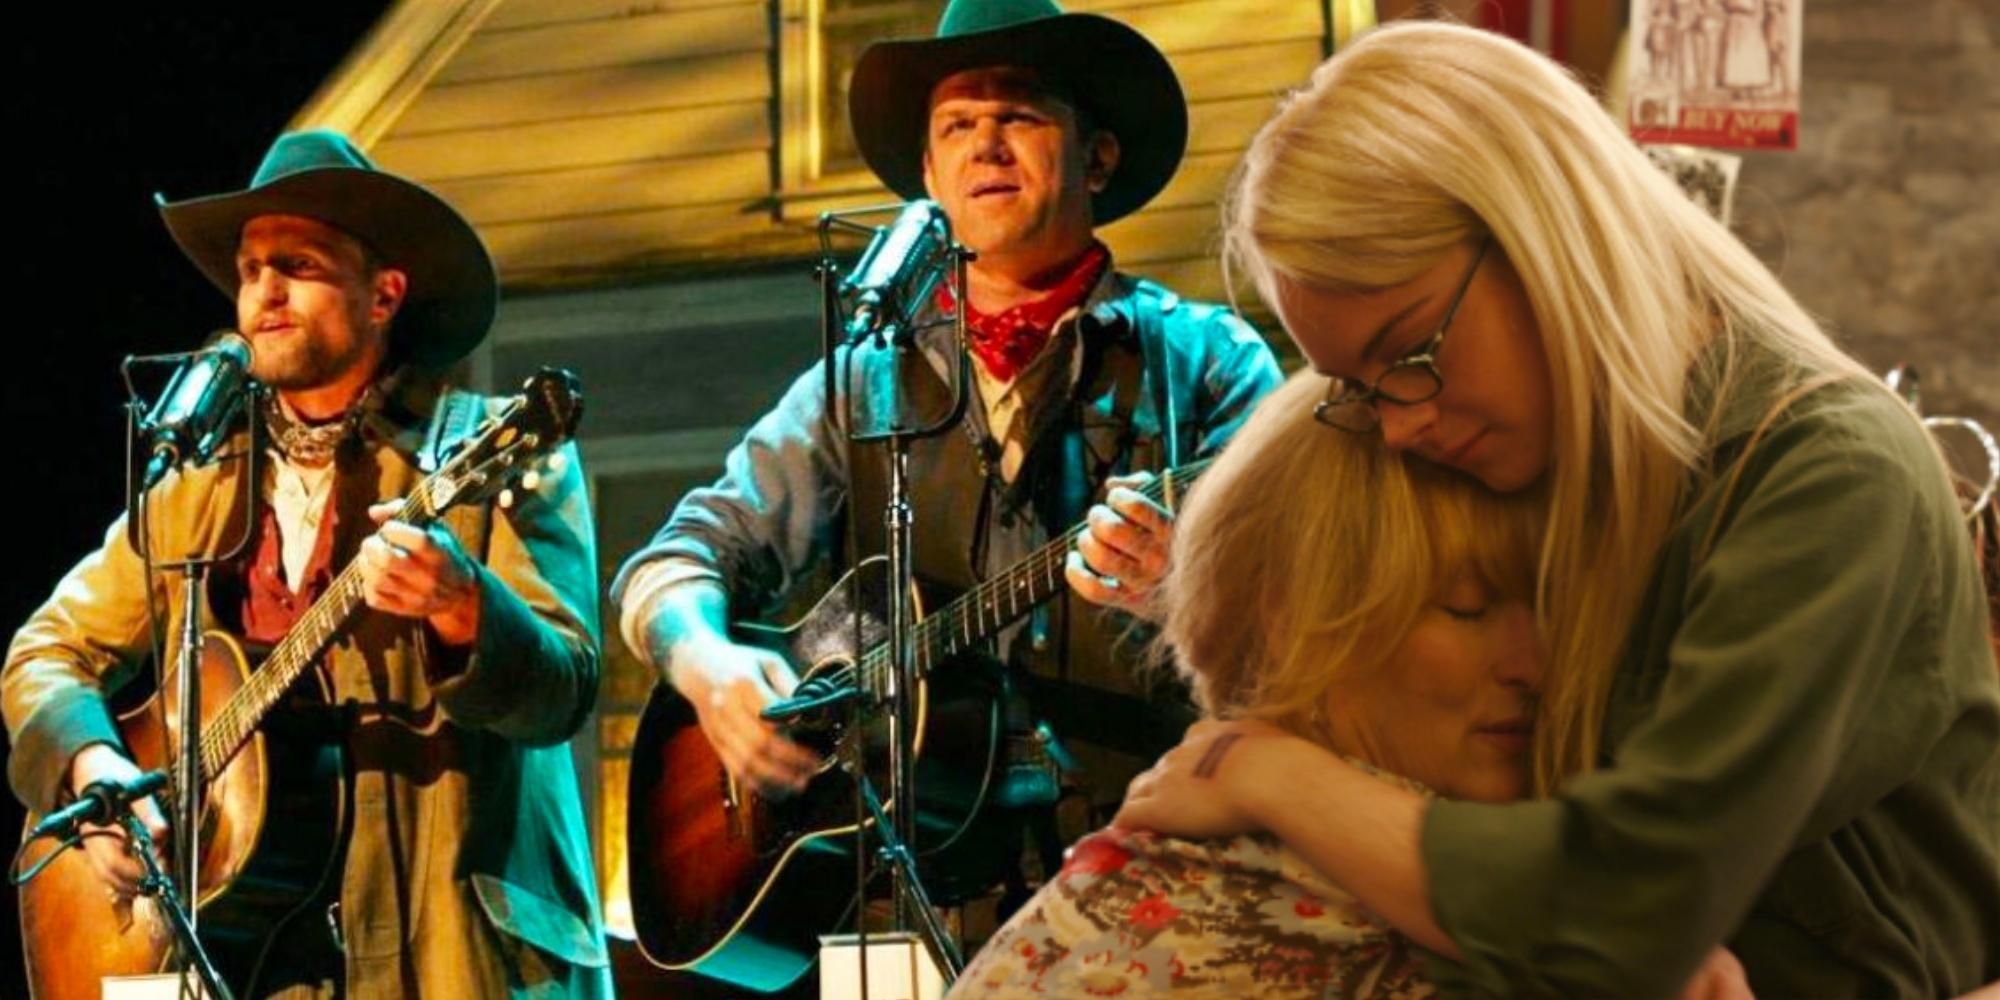 Woody Harrelson and John C Reilly singing and playing guitar, Lindsay Lohan hugging Meryl Streep in A Prairie Home Companion